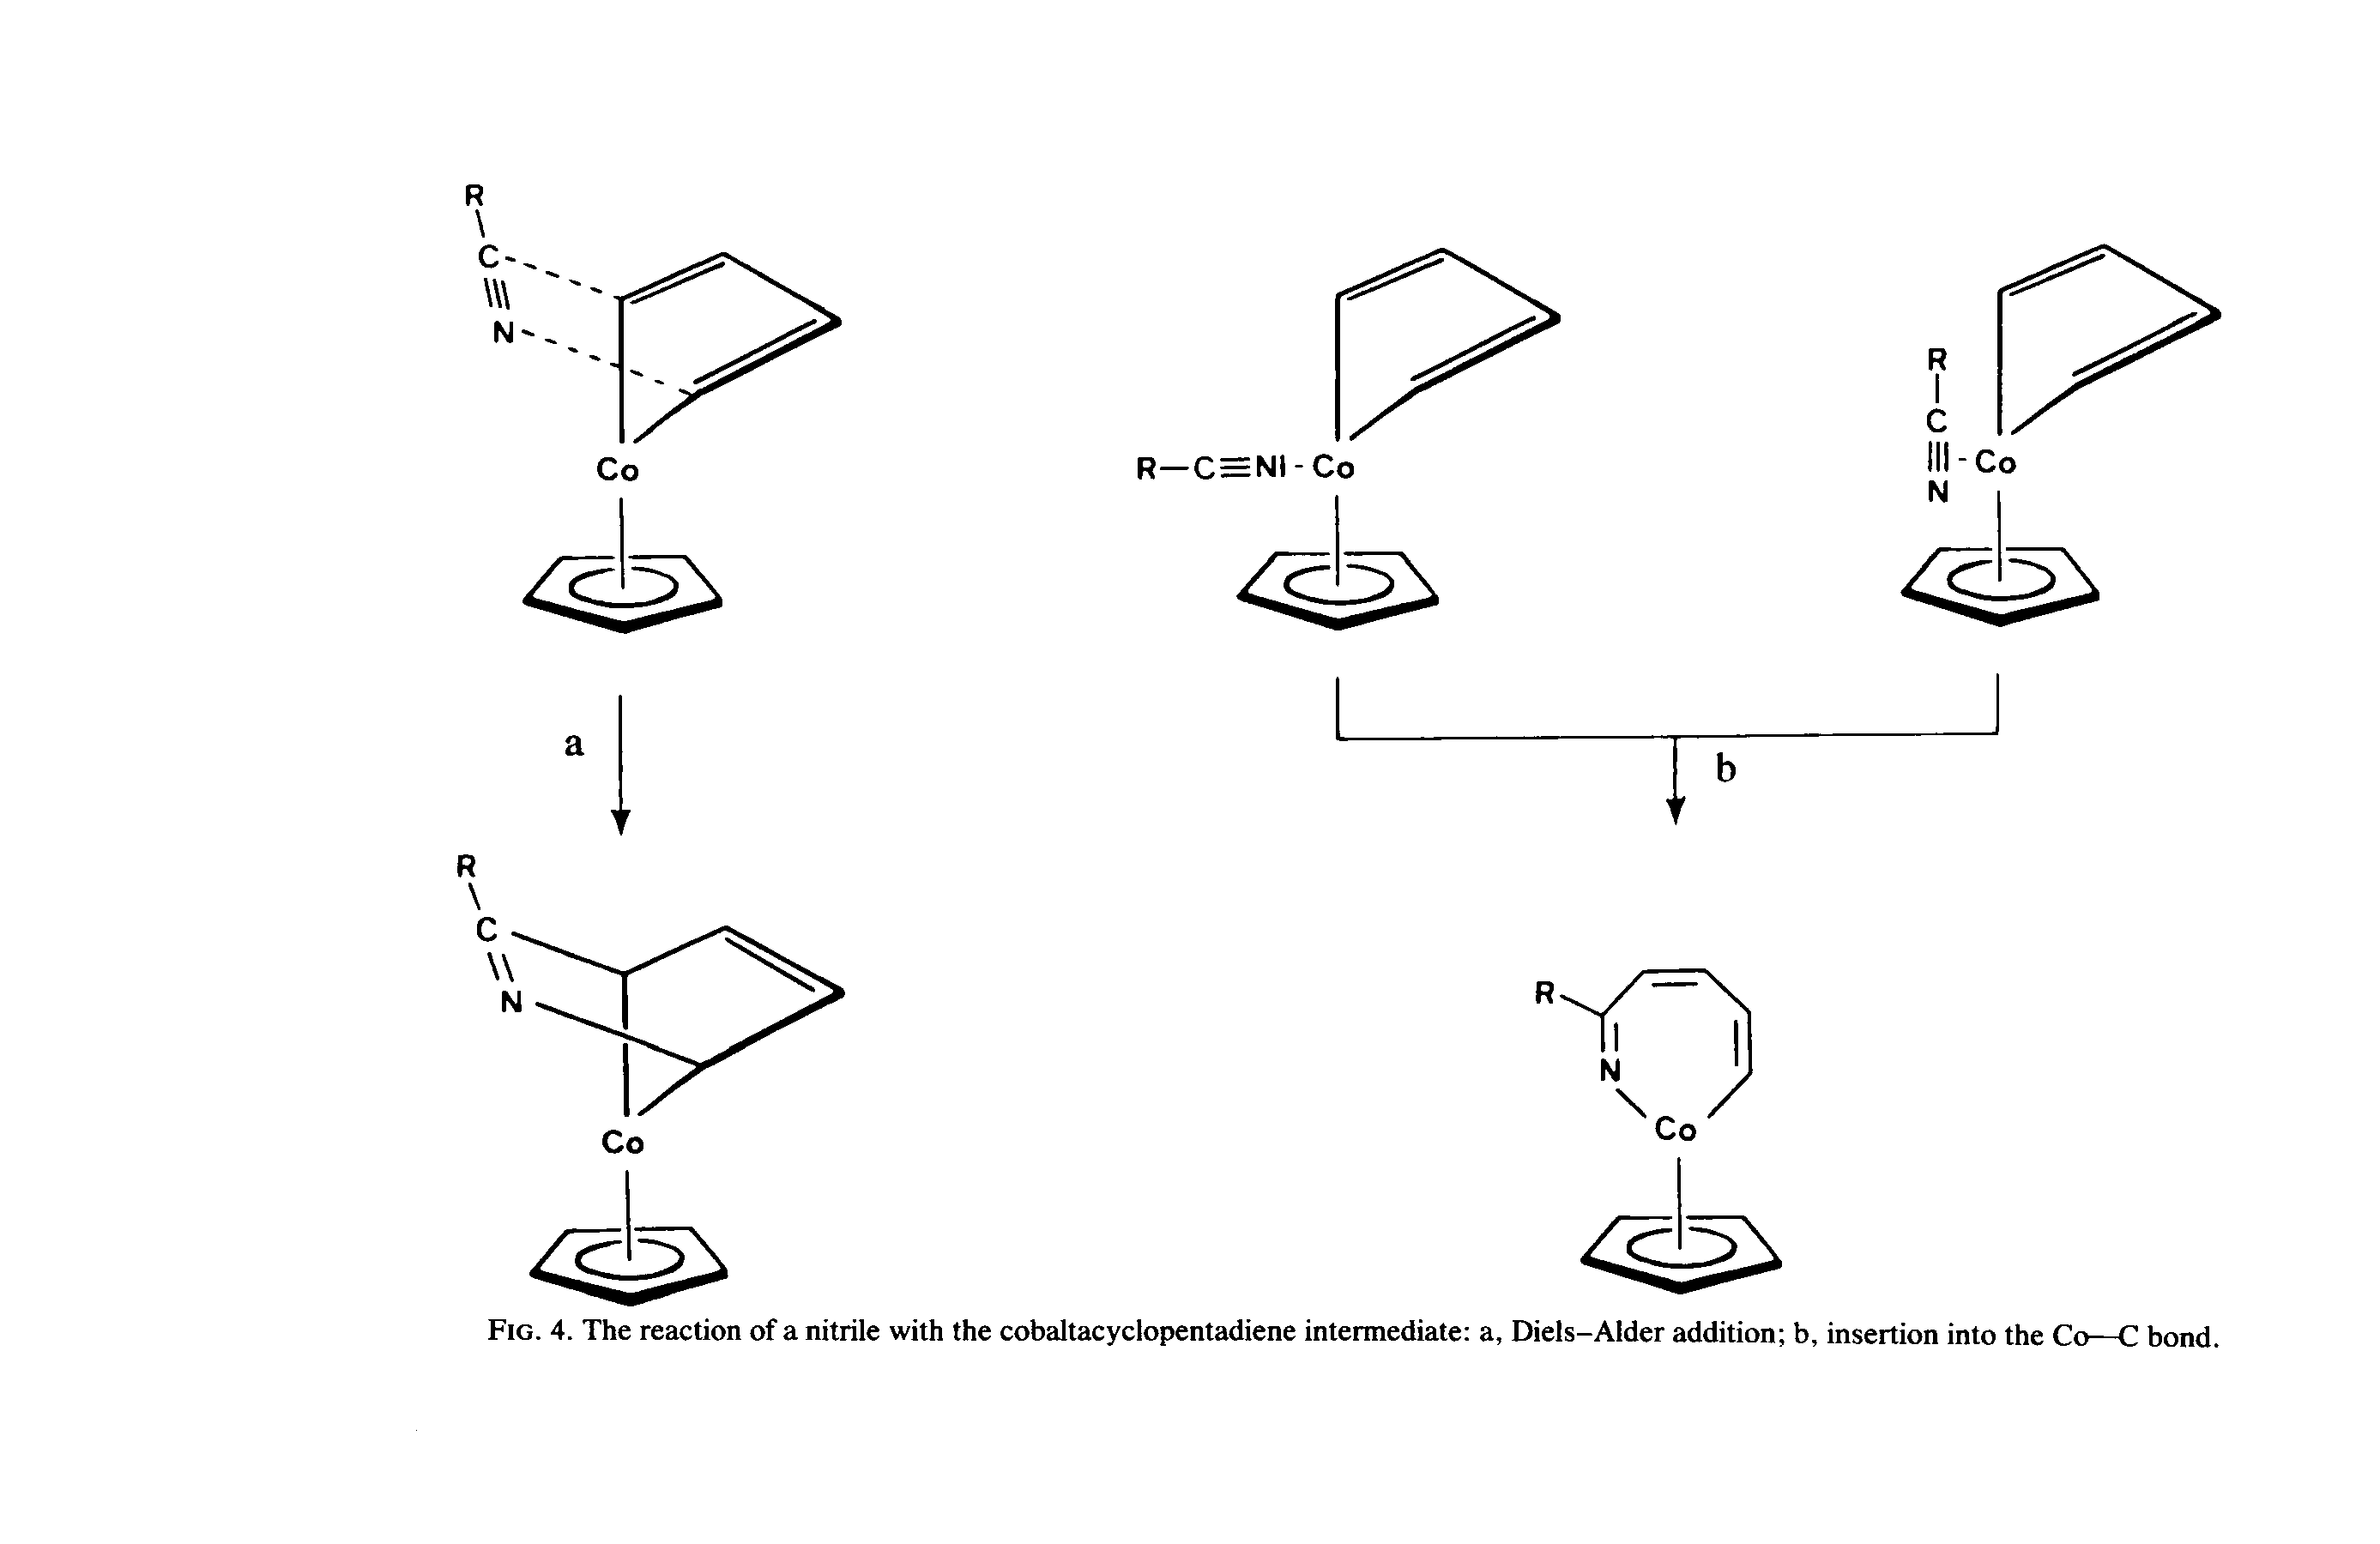 Fig. 4. The reaction of a nitrile with the cobaltacyclopentadiene intermediate a, Diels-Alder addition b, insertion into the Co—C bond.